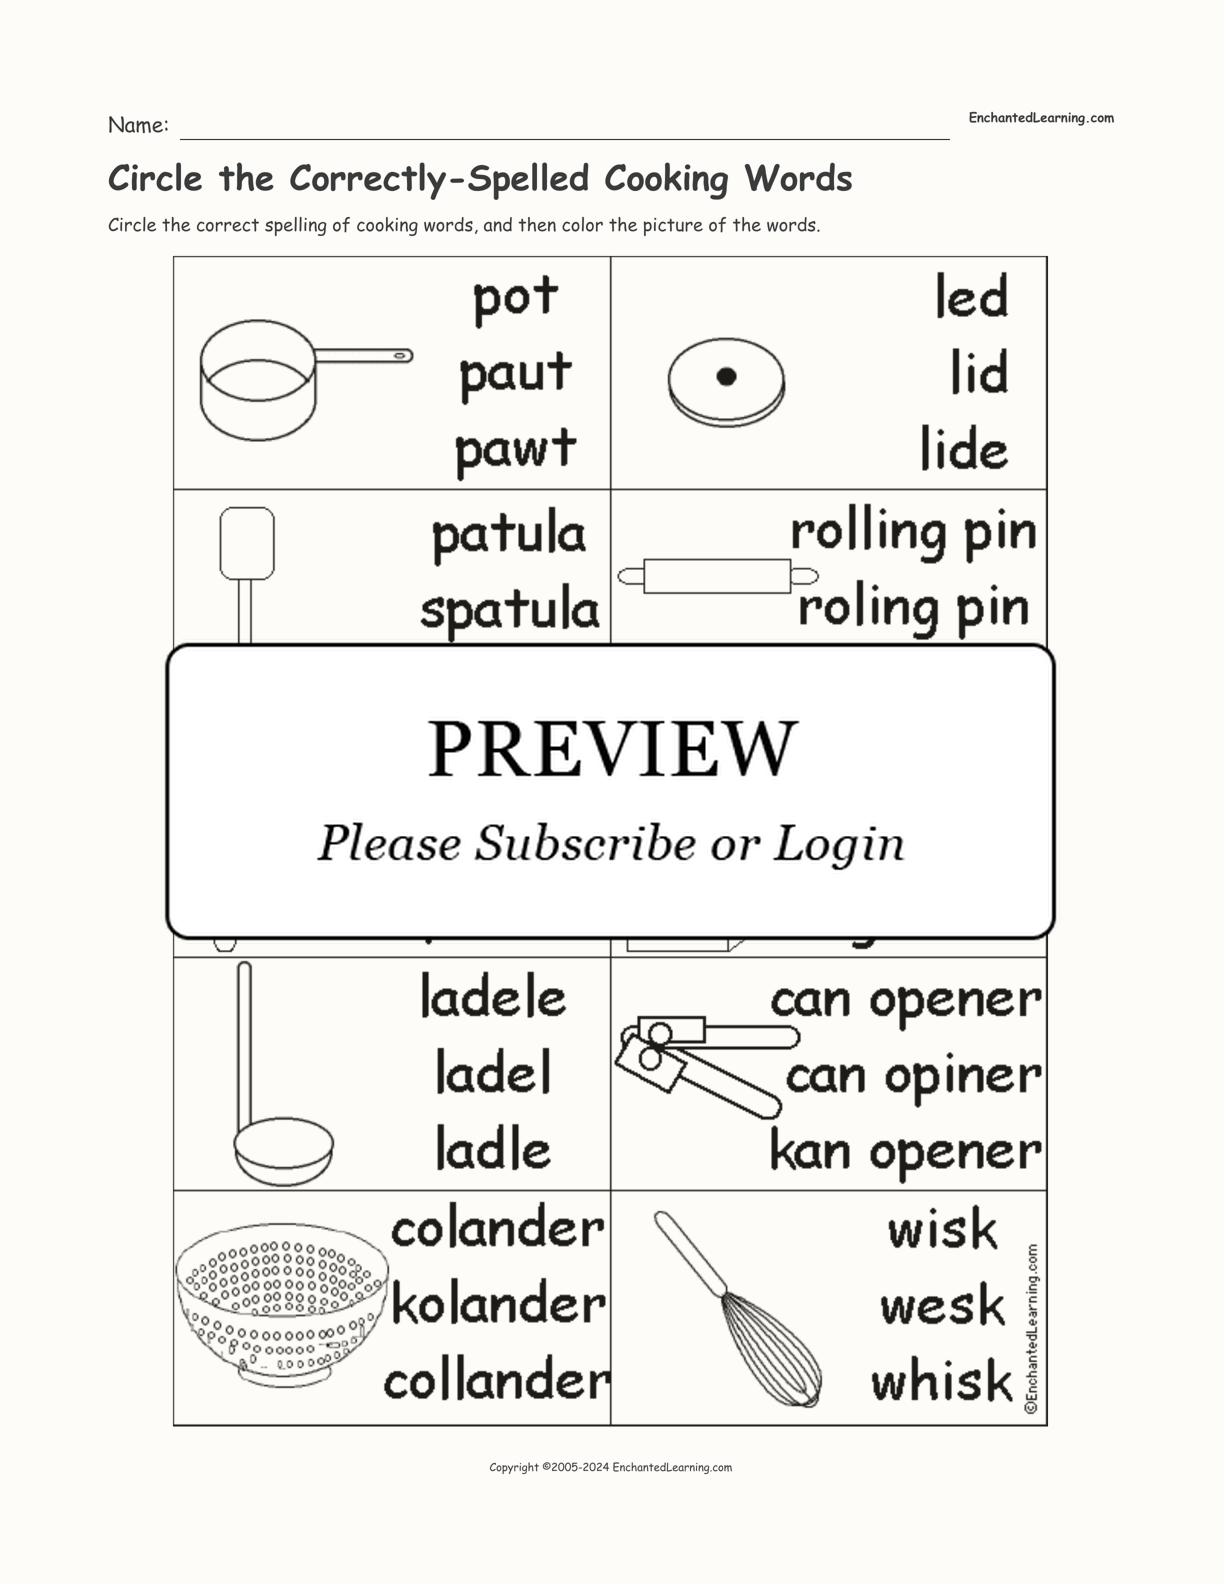 Circle the Correctly-Spelled Cooking Words interactive worksheet page 1